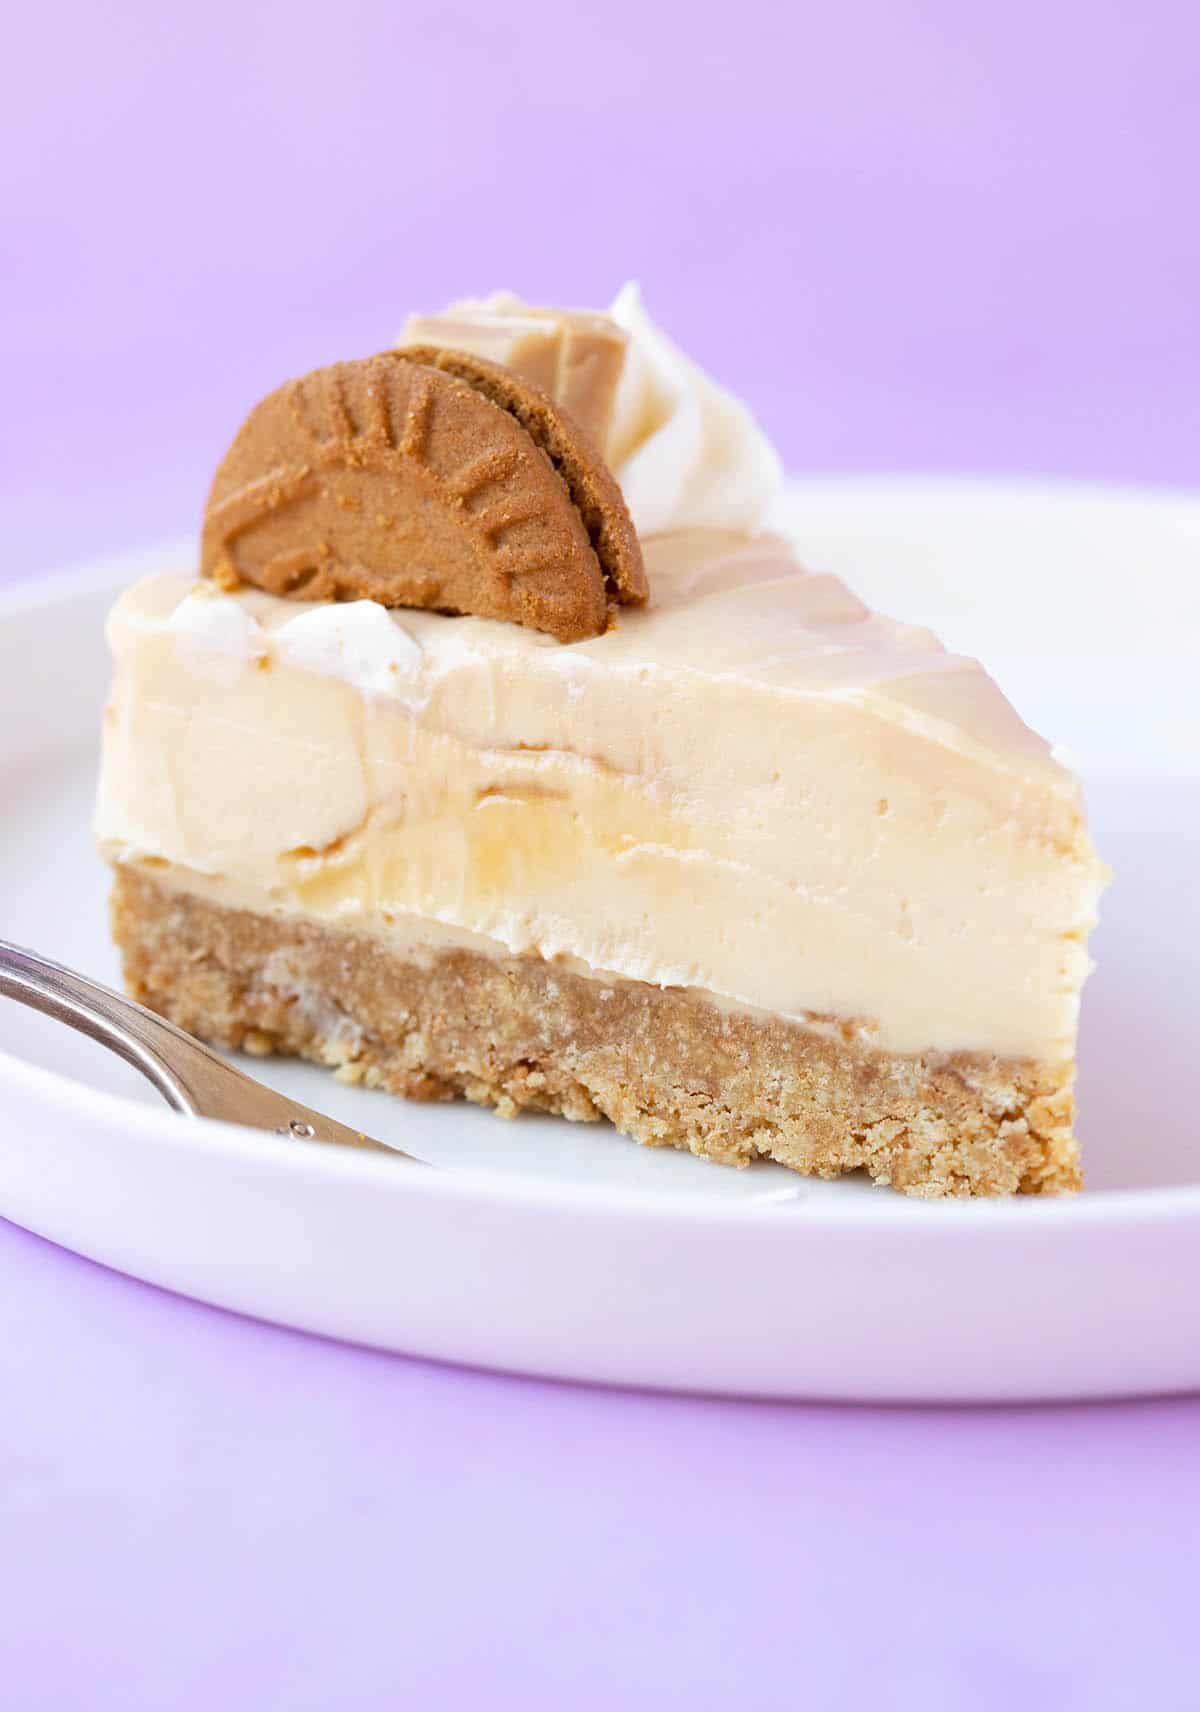 A slice of no bake Caramilk Cheesecake on white plate with a purple background.